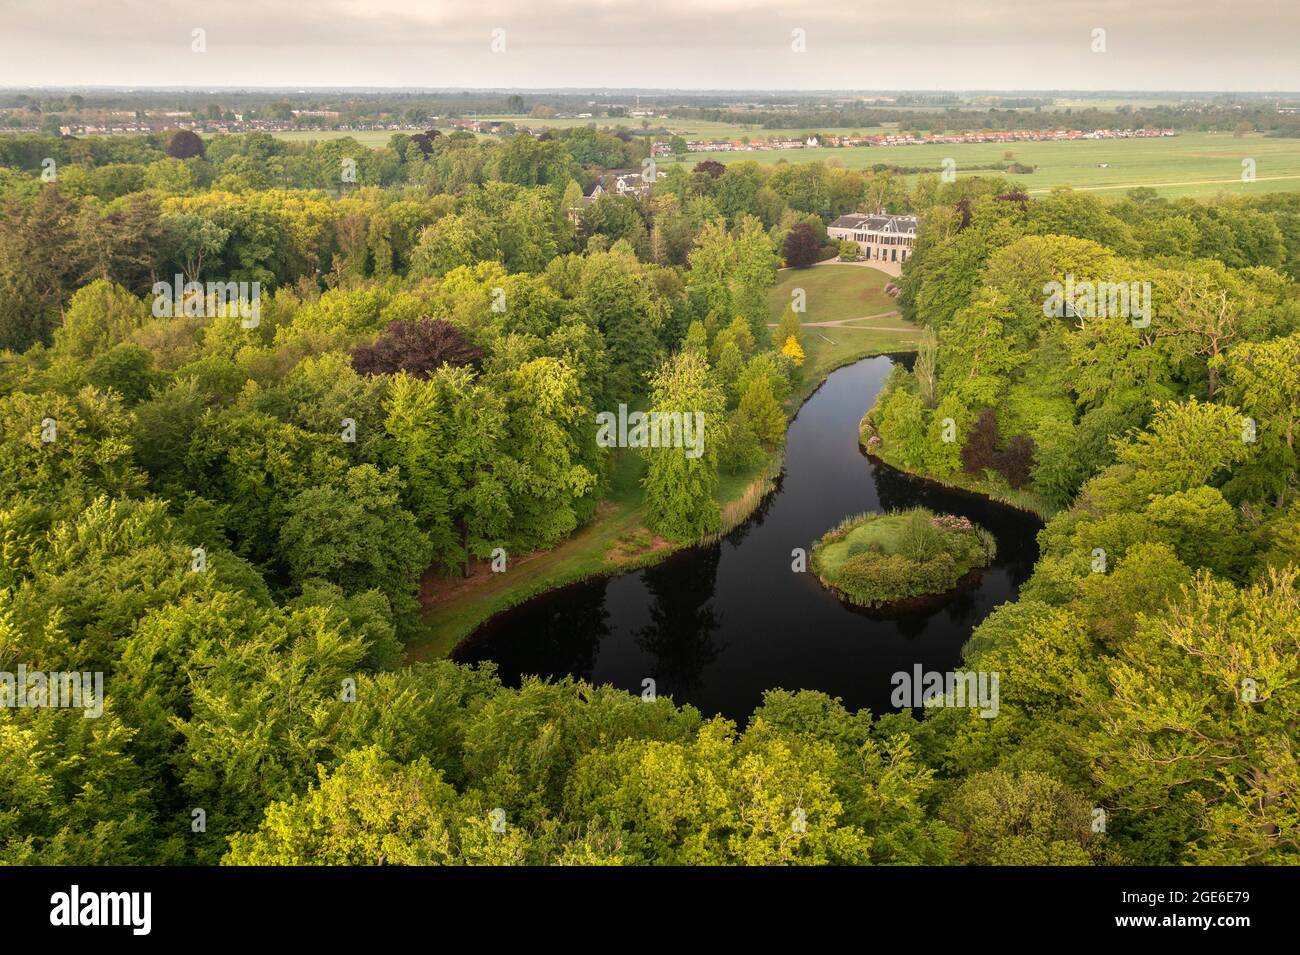 The Netherlands, Õs-Graveland, Rural estate Schaep en Burgh. Country house with lawn. Former Headquarters of Natuurmonumenten. Aerial. Stock Photo